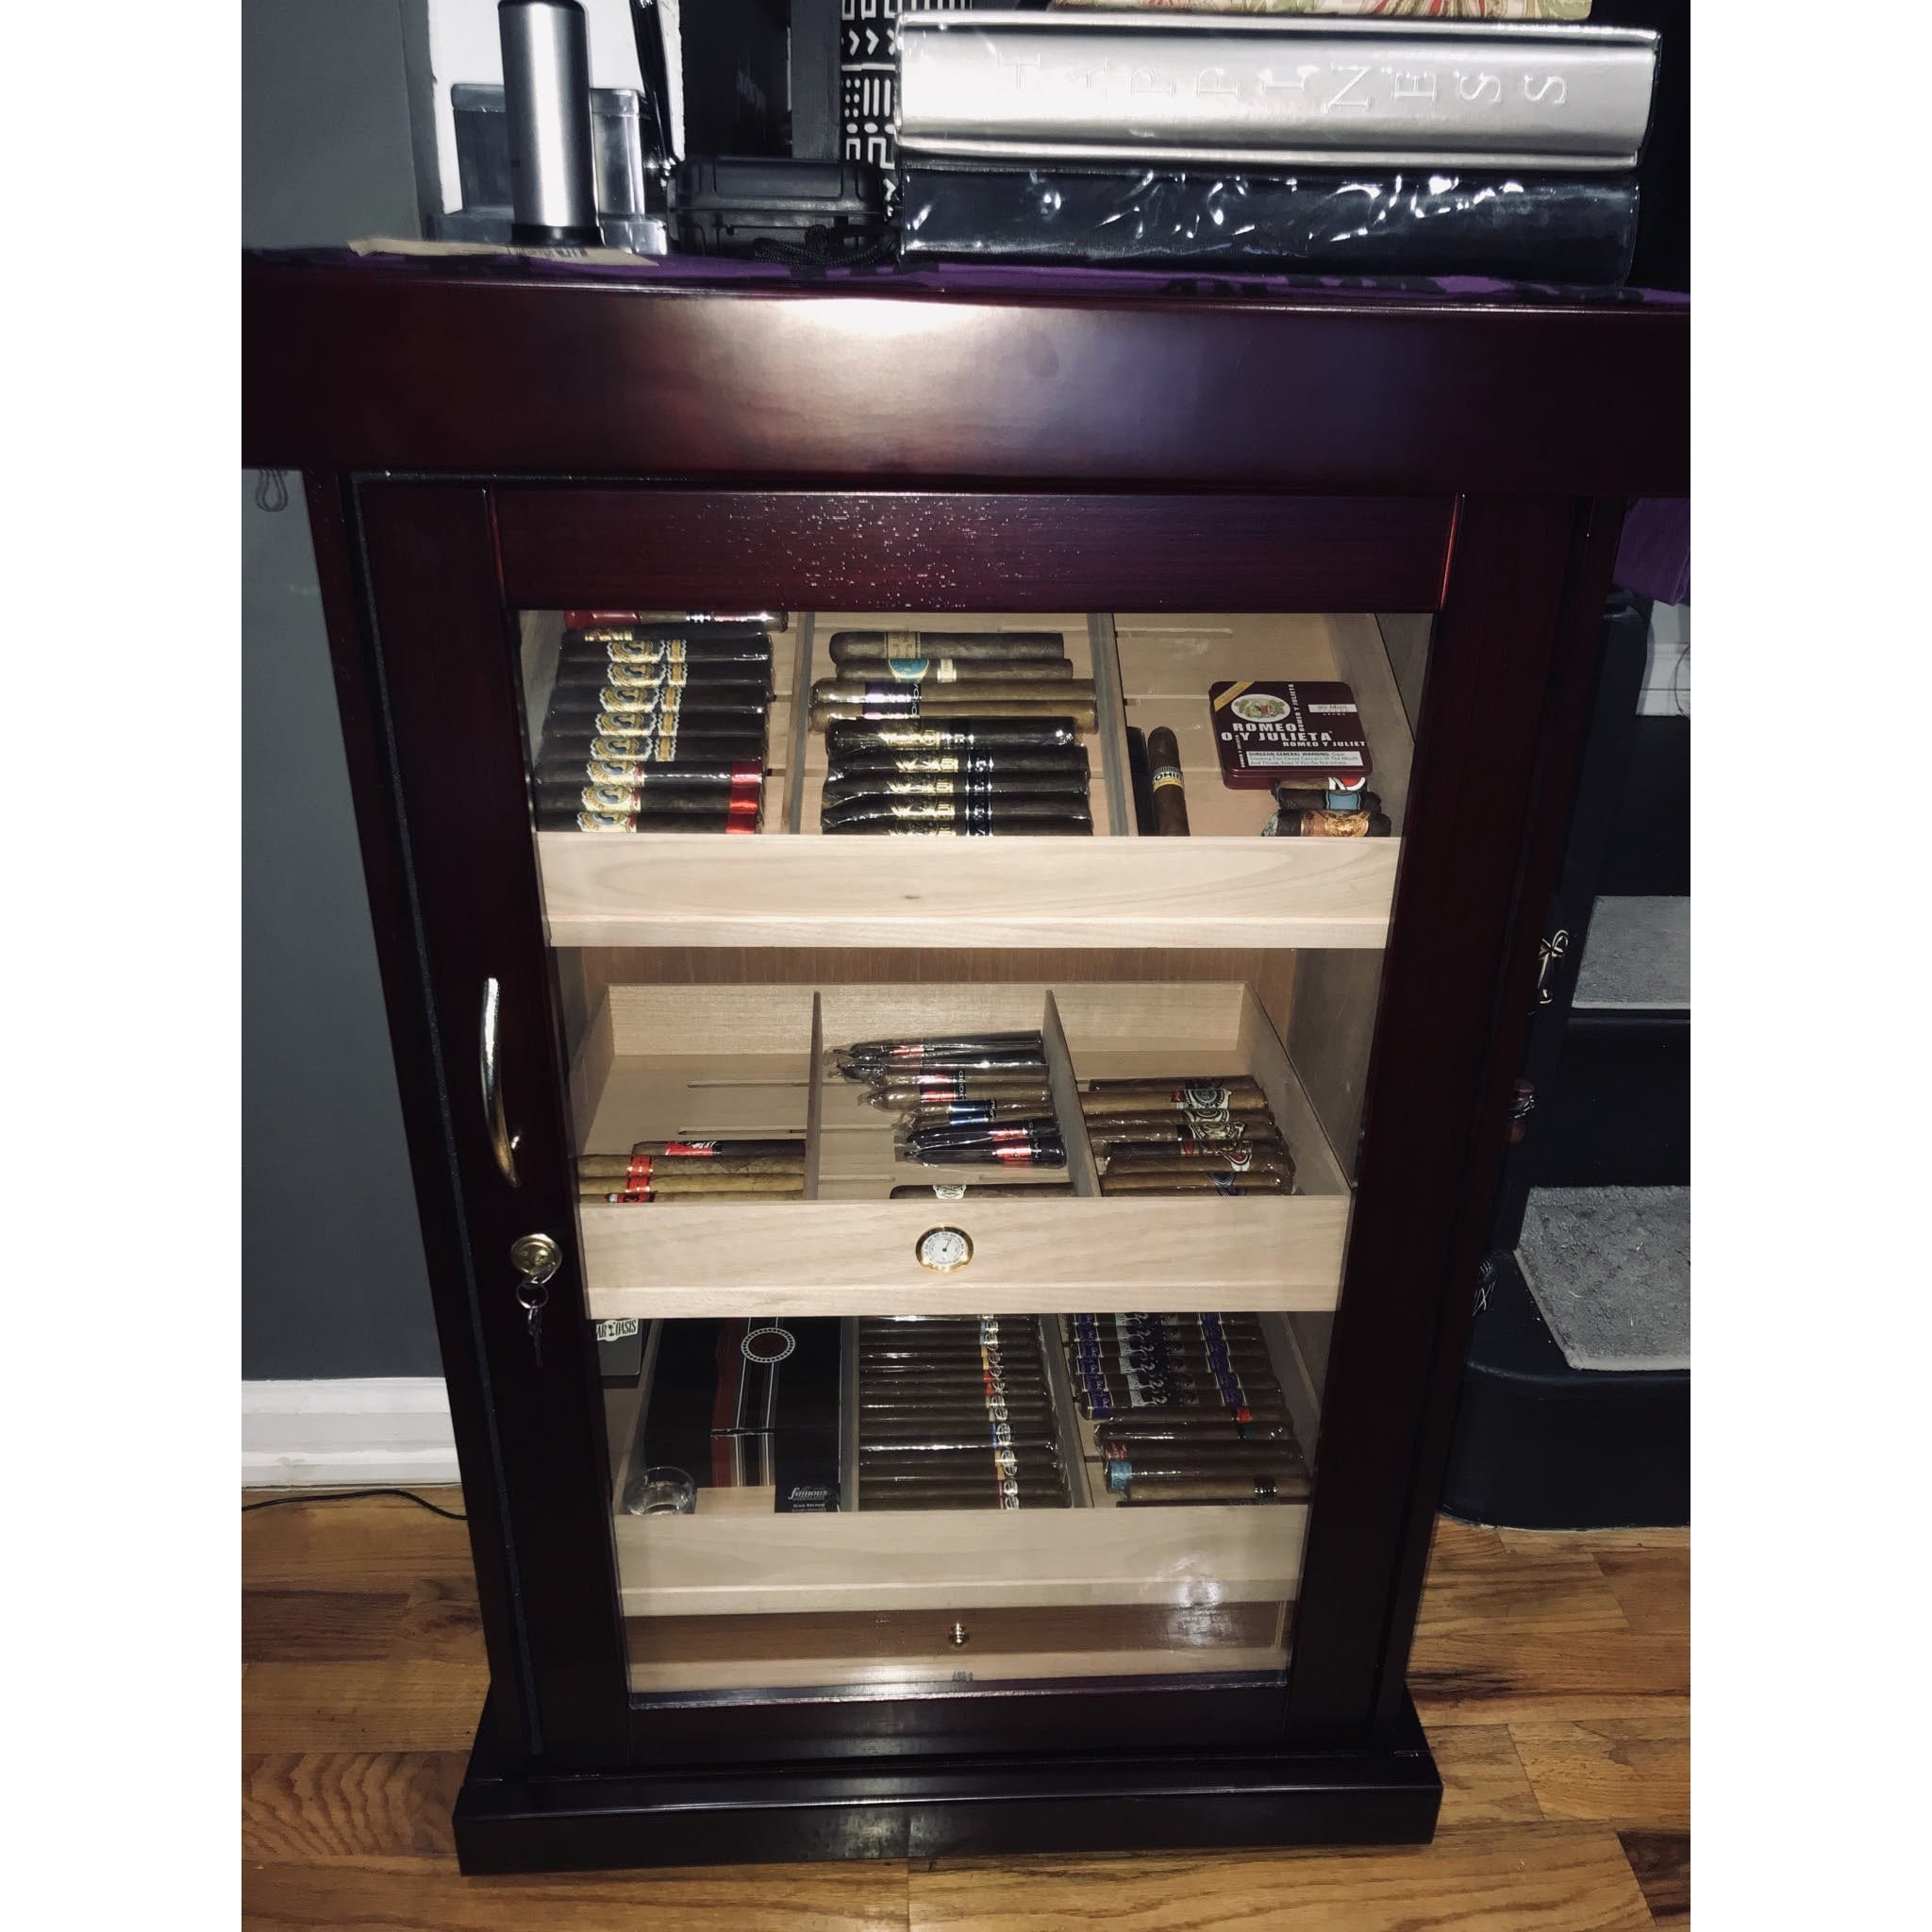 The Spartacus Display Tower Cabinet Cigar Humidor Humidor SPRT Wine Coolers Empire